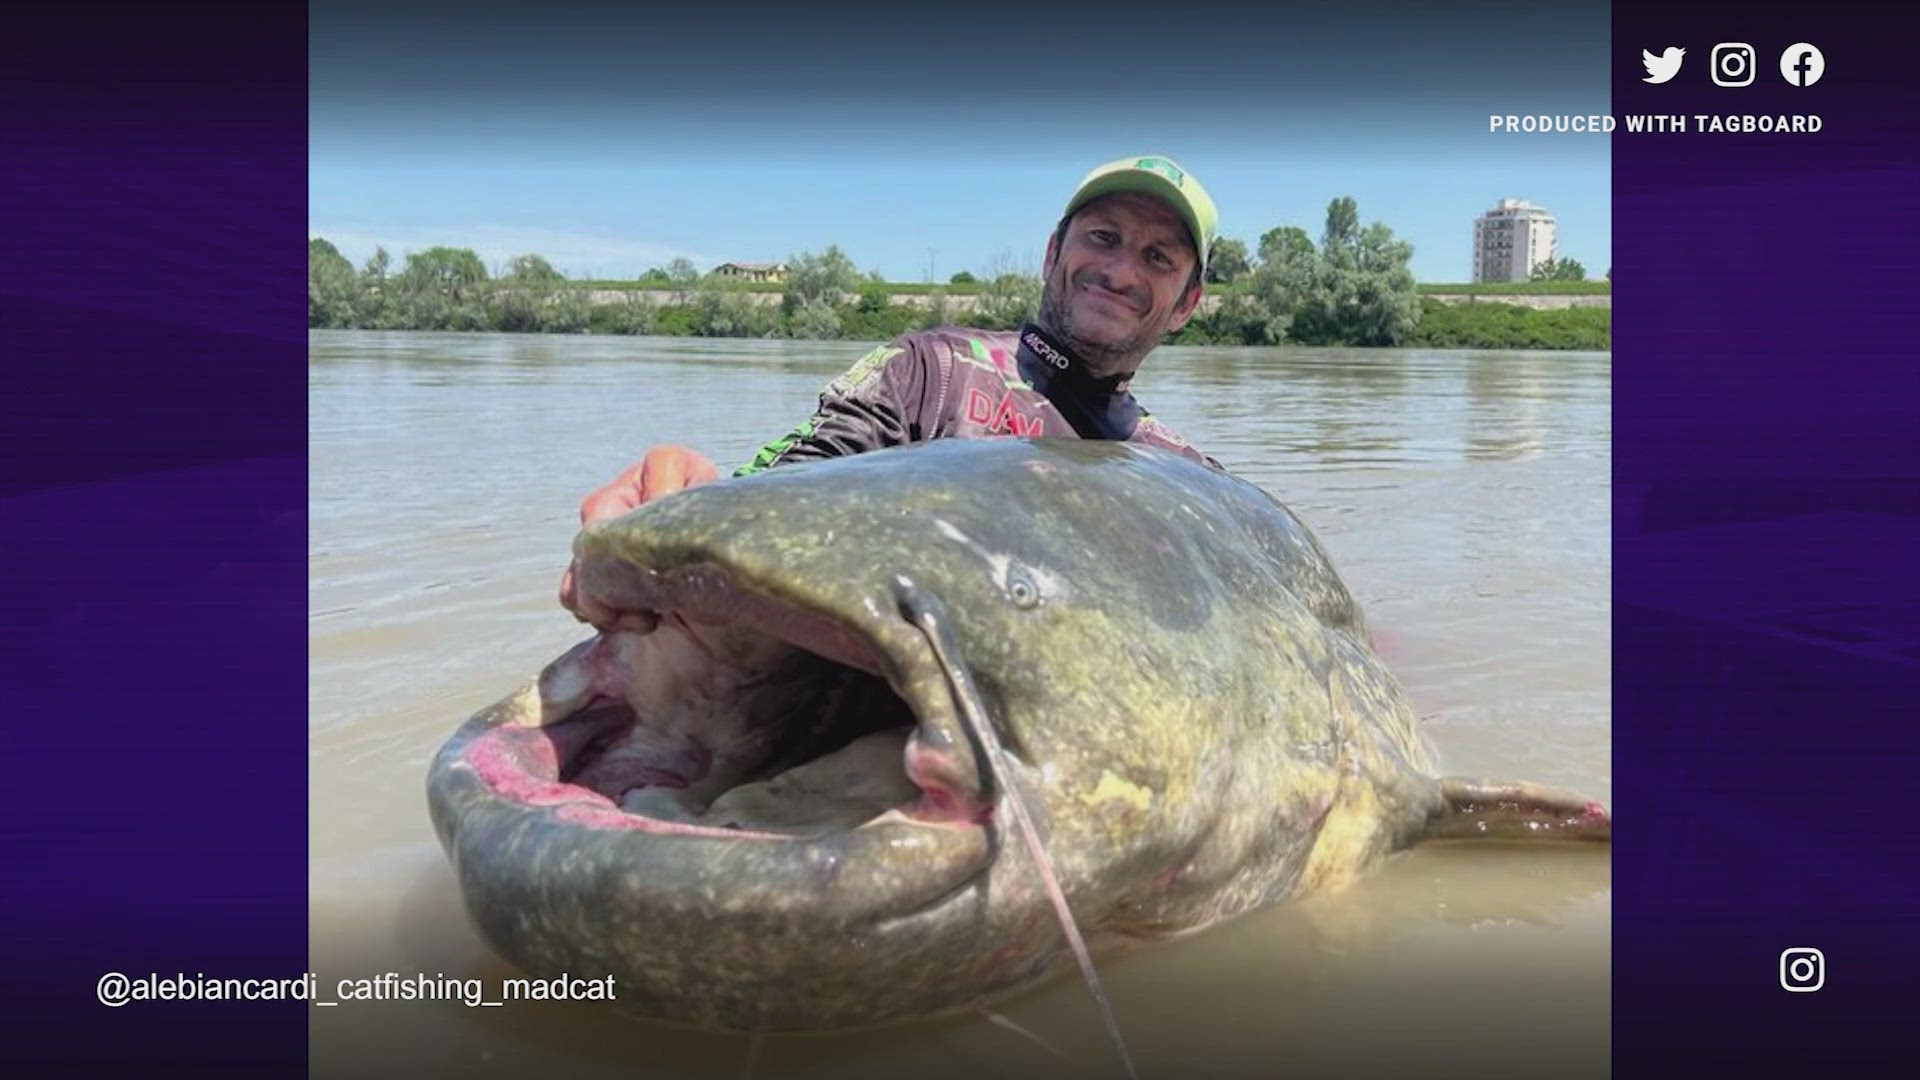 Italian angler could be the new world-record holder after reeling in this massive catfish that measured more than nine feet long!